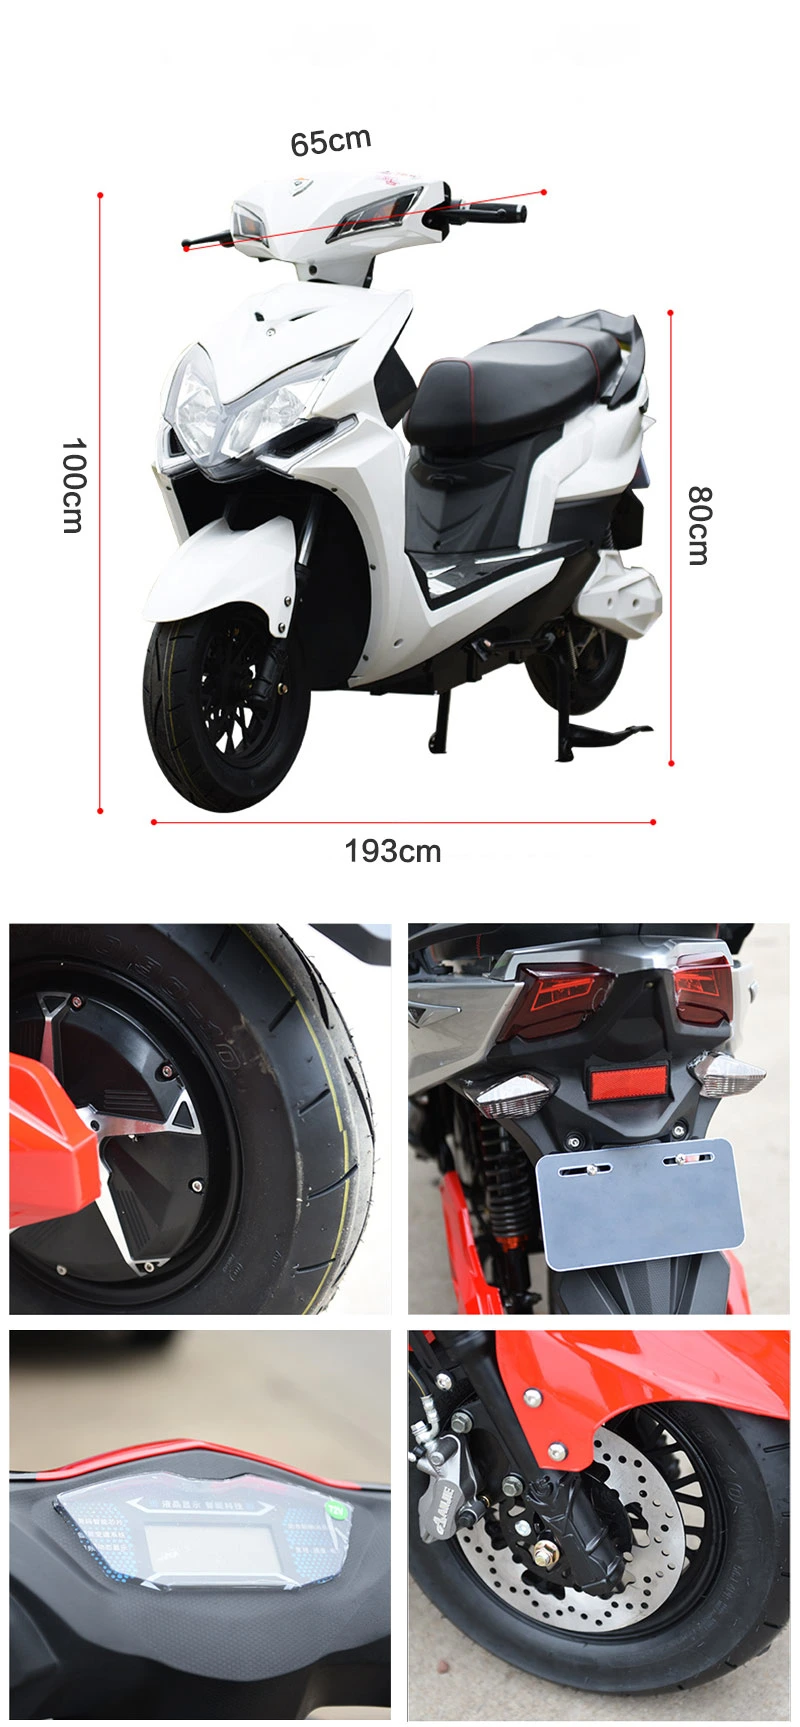 Two Wheel 1000W to 2000W Adult Electric Motorcycle Electric Bike